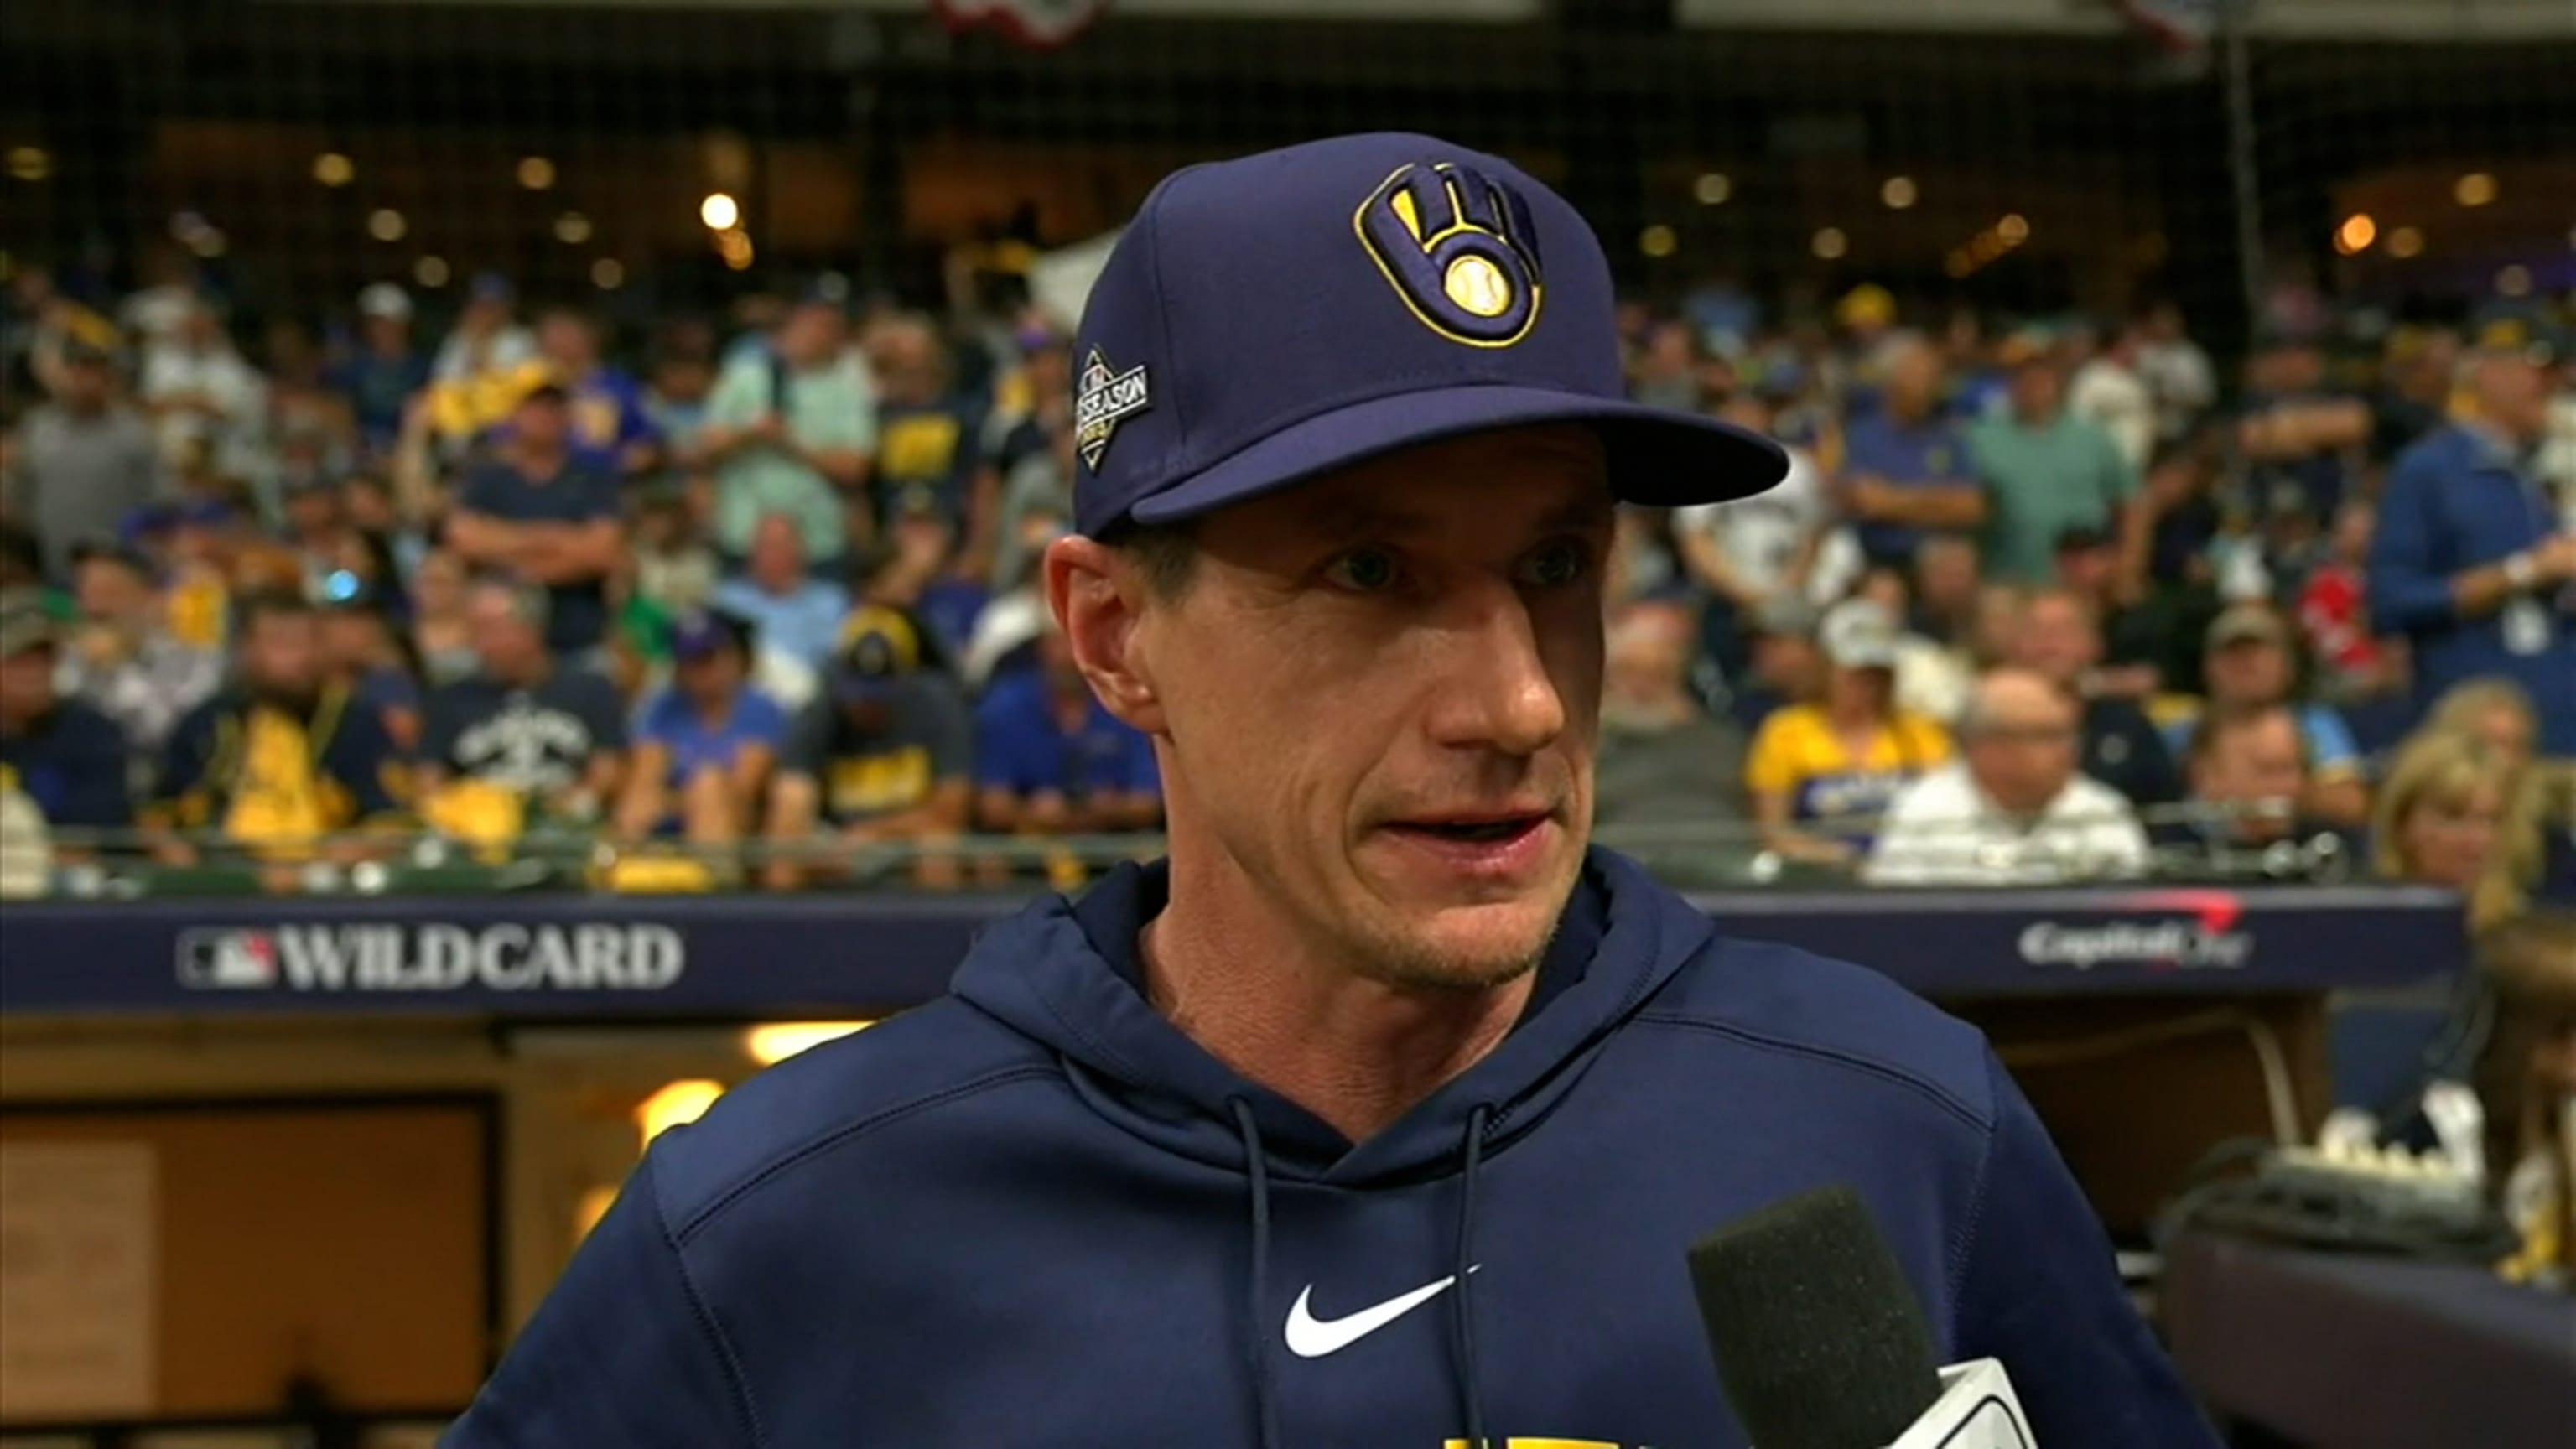 Turns Out Craig Counsell Was Actually Best Baseball Player Of